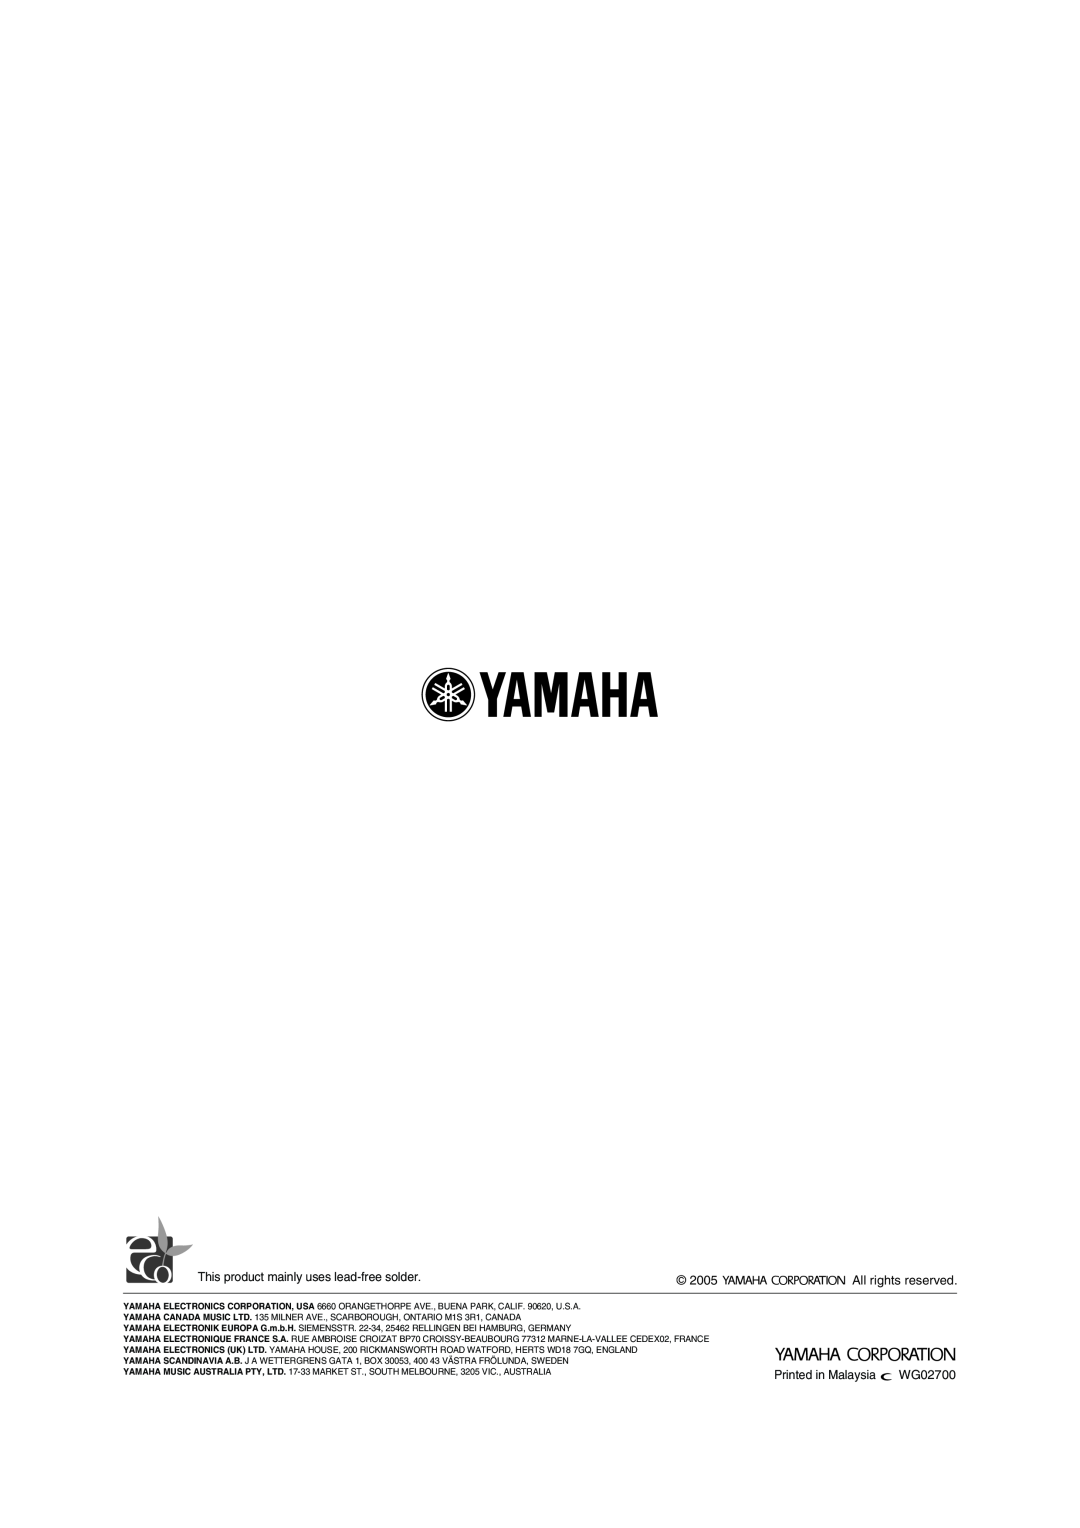 Yamaha AX-397, AX-497 owner manual This product mainly uses lead-freesolder, 2005, WG02700, All rights reserved 